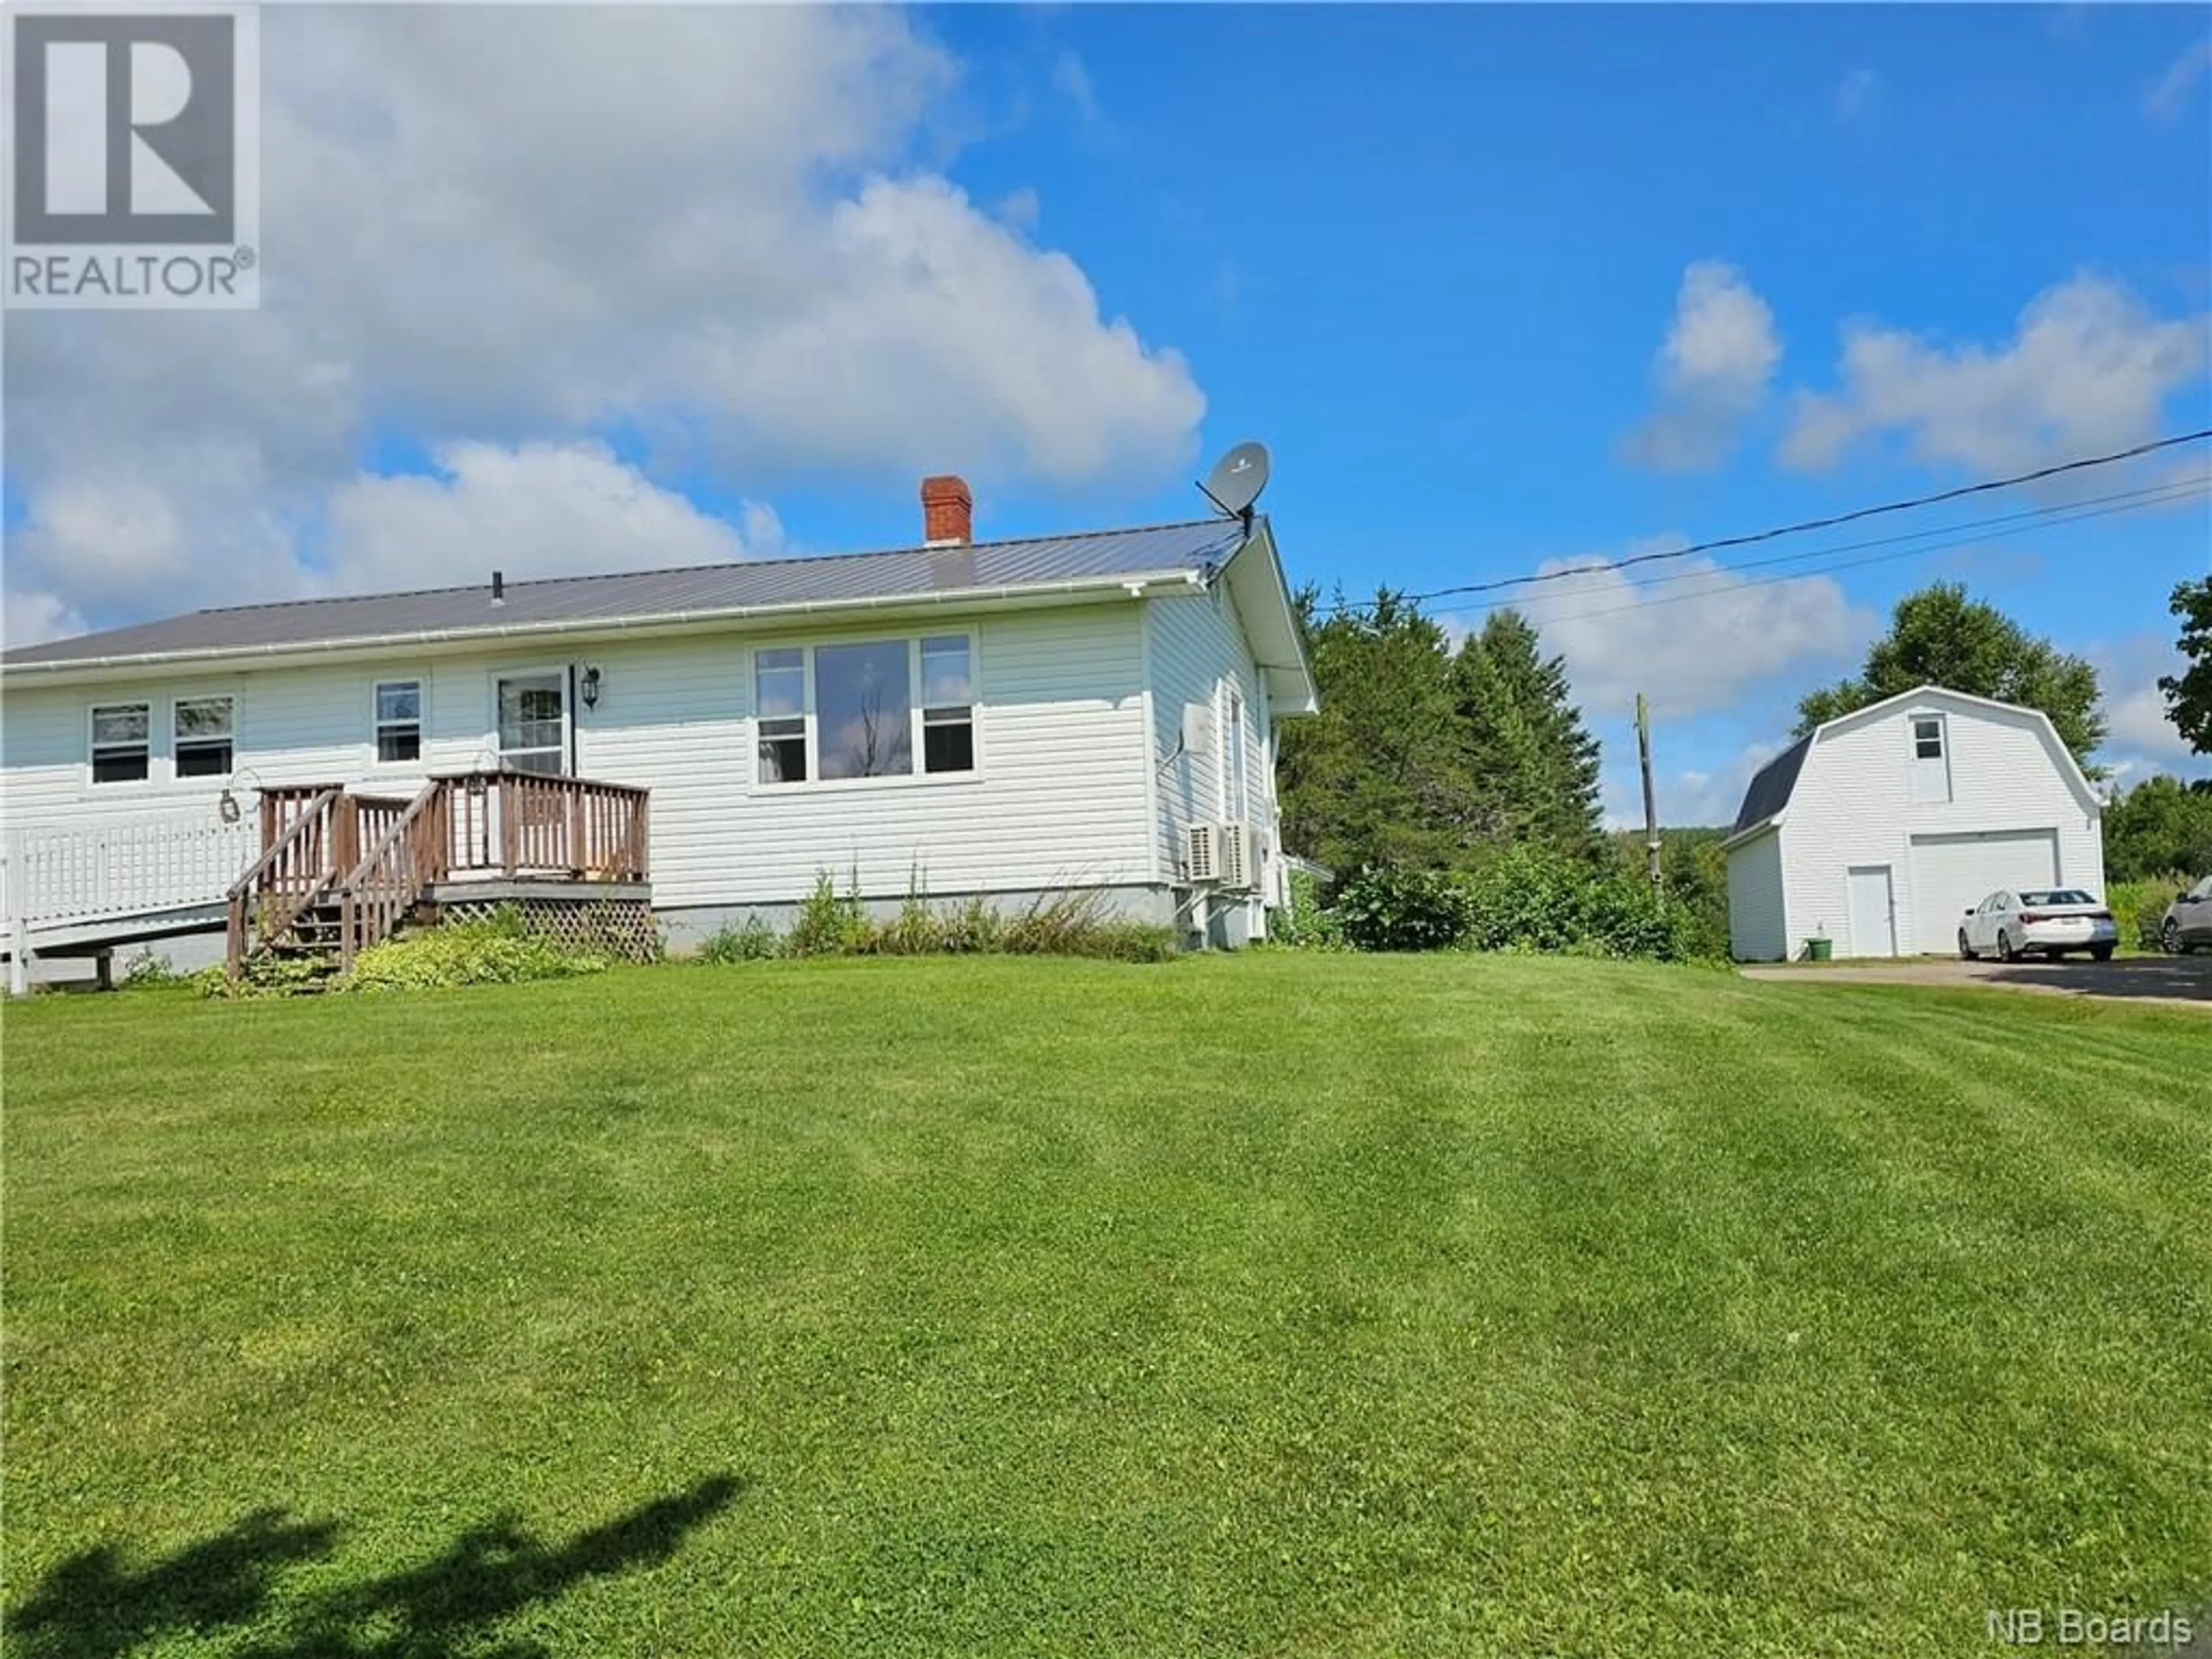 Frontside or backside of a home for 2994 890 Route, Cornhill New Brunswick E4Z1M4